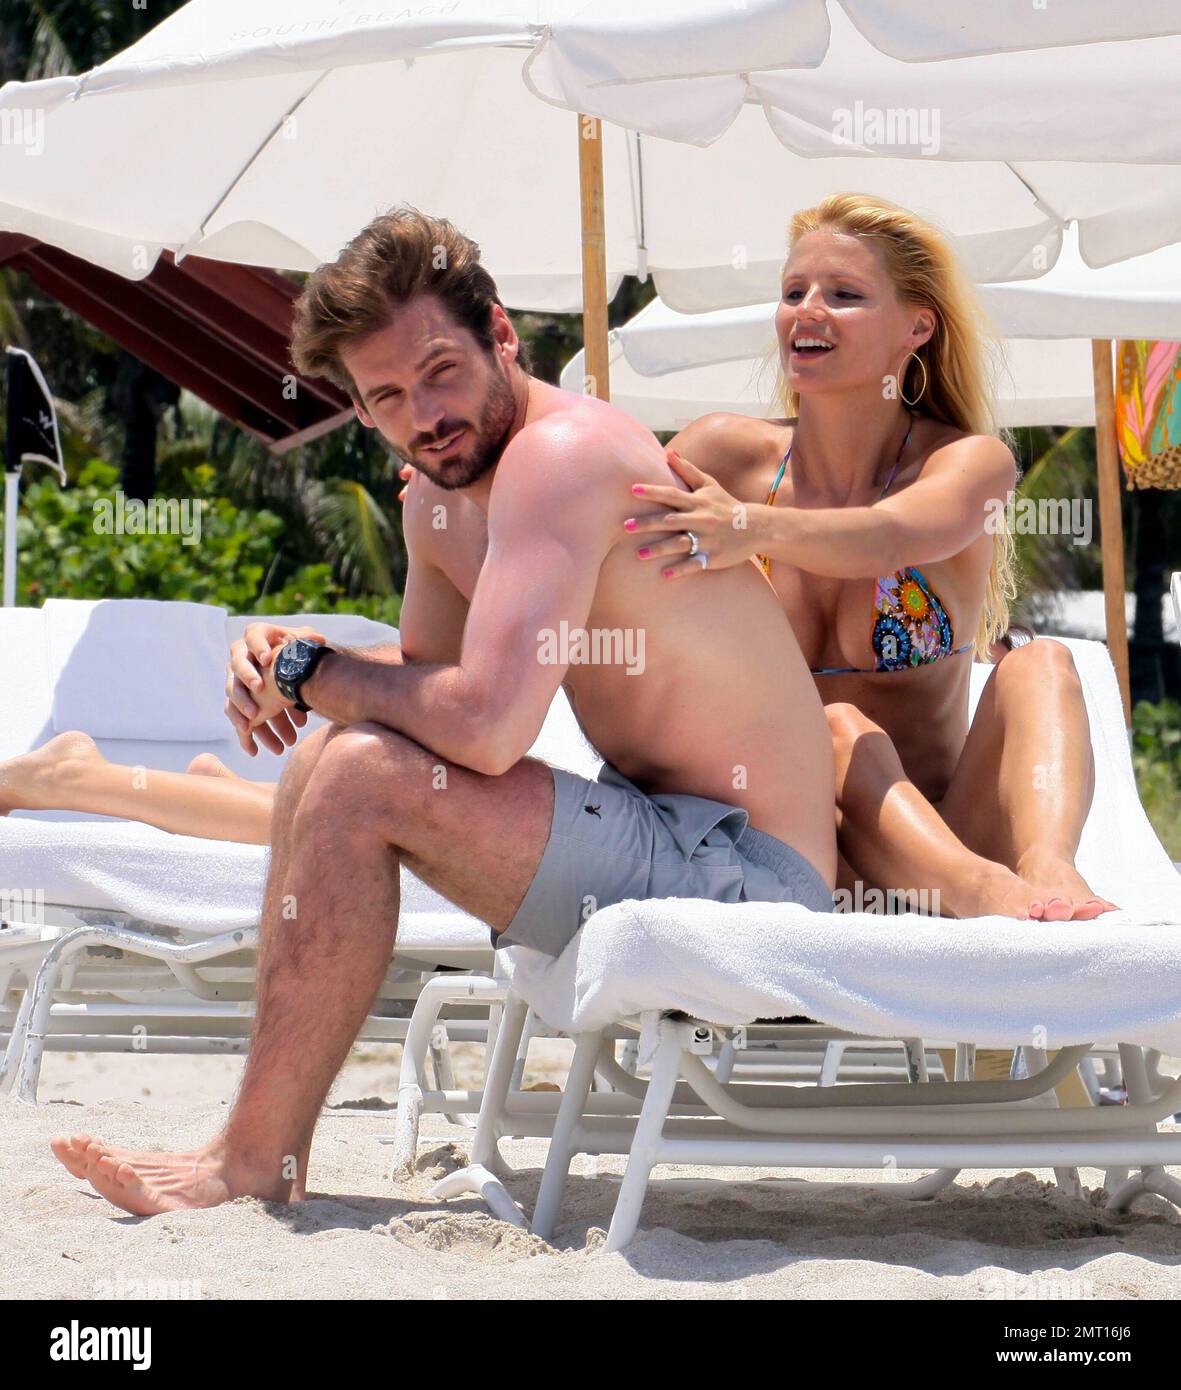 Swiss TV host and actress Michelle Hunziker spends the day in Miami Beach with boyfriend Tomaso Trussardi. 35 year old Hunziker wore a multi-color string bikini that showed off her amazing toned figure. The couple were seen taking a dip in the ocean, sharing a kiss and happily walking hand-in-hand. Miami Beach, FL. 3rd June 2012. Stock Photo